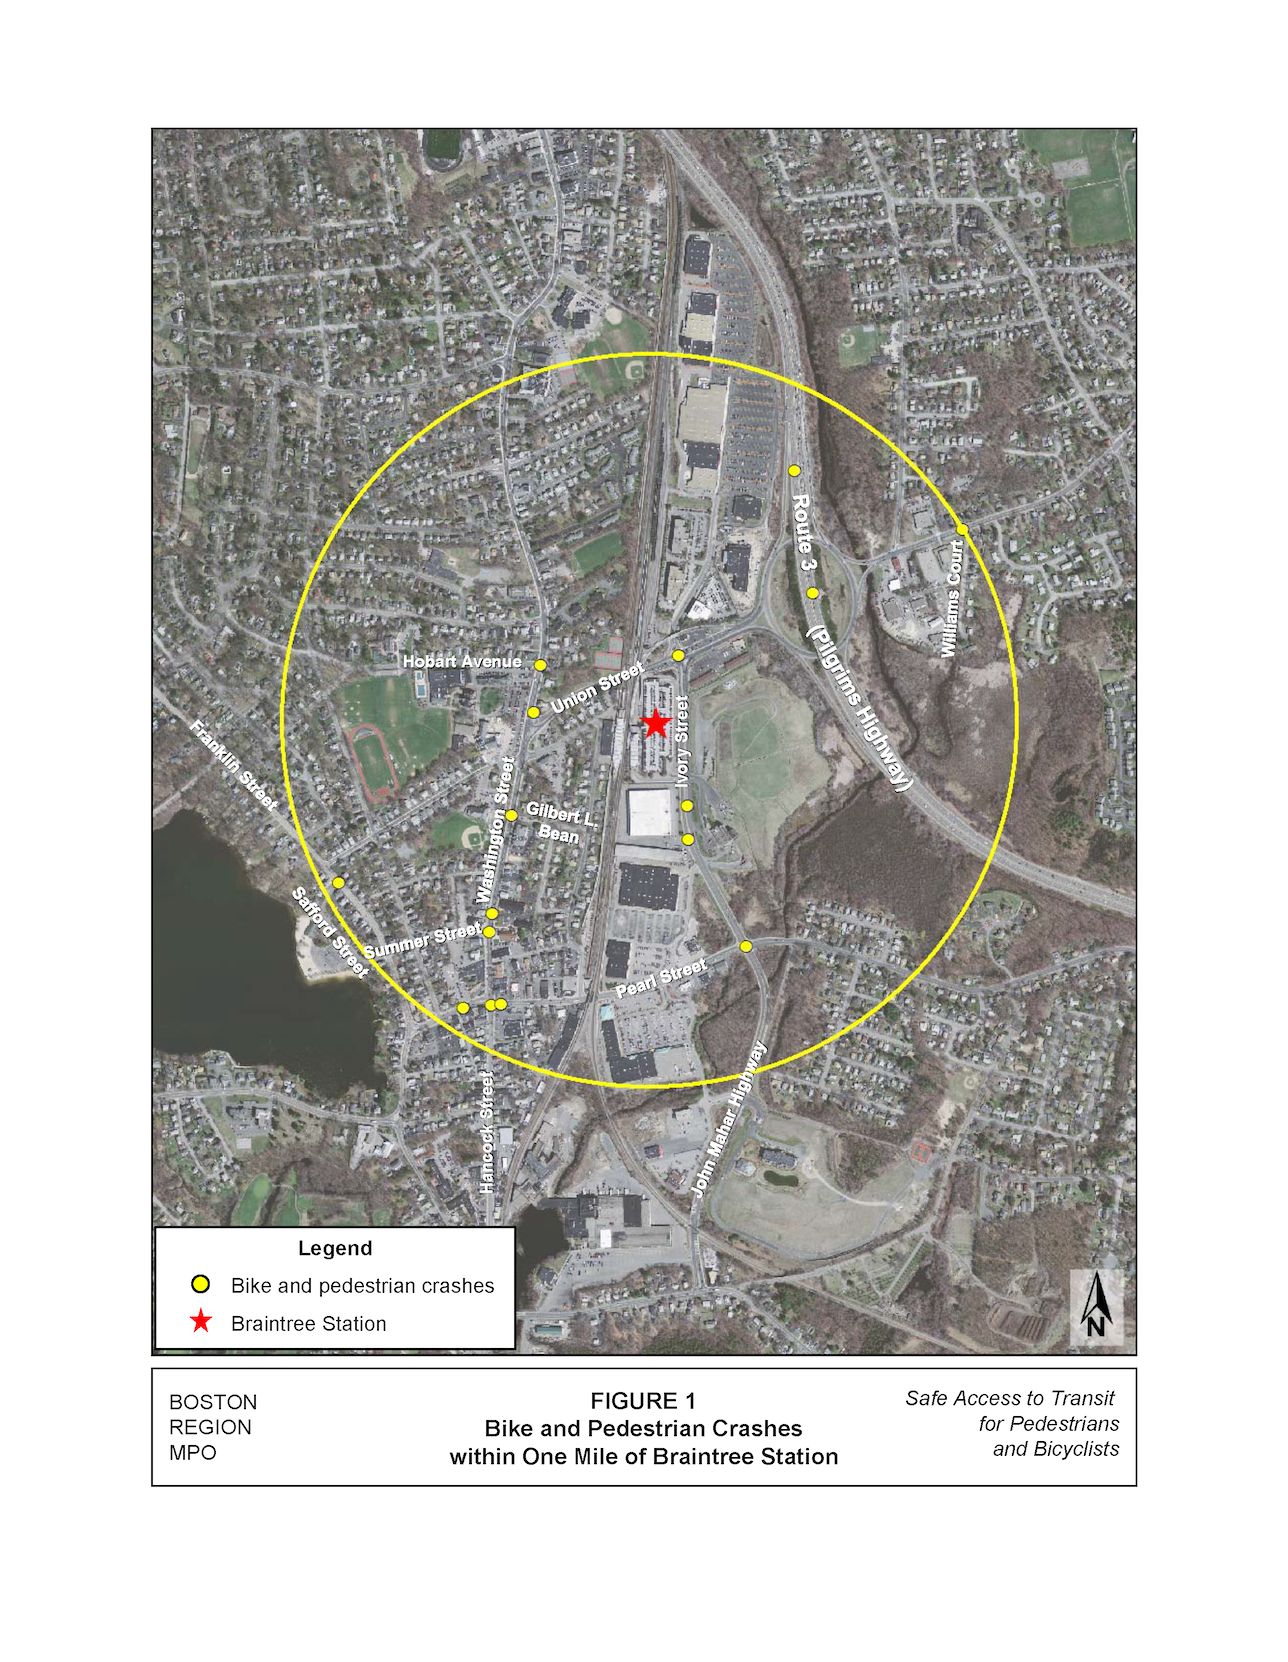 Figure 1 – Bike and Pedestrian Crashes within One Mile of Braintree Station Figure 1 is an aerial photo that shows the locations of bicycle and pedestrian crashes that occurred within one mile of Braintree Station between 2005 and 2009